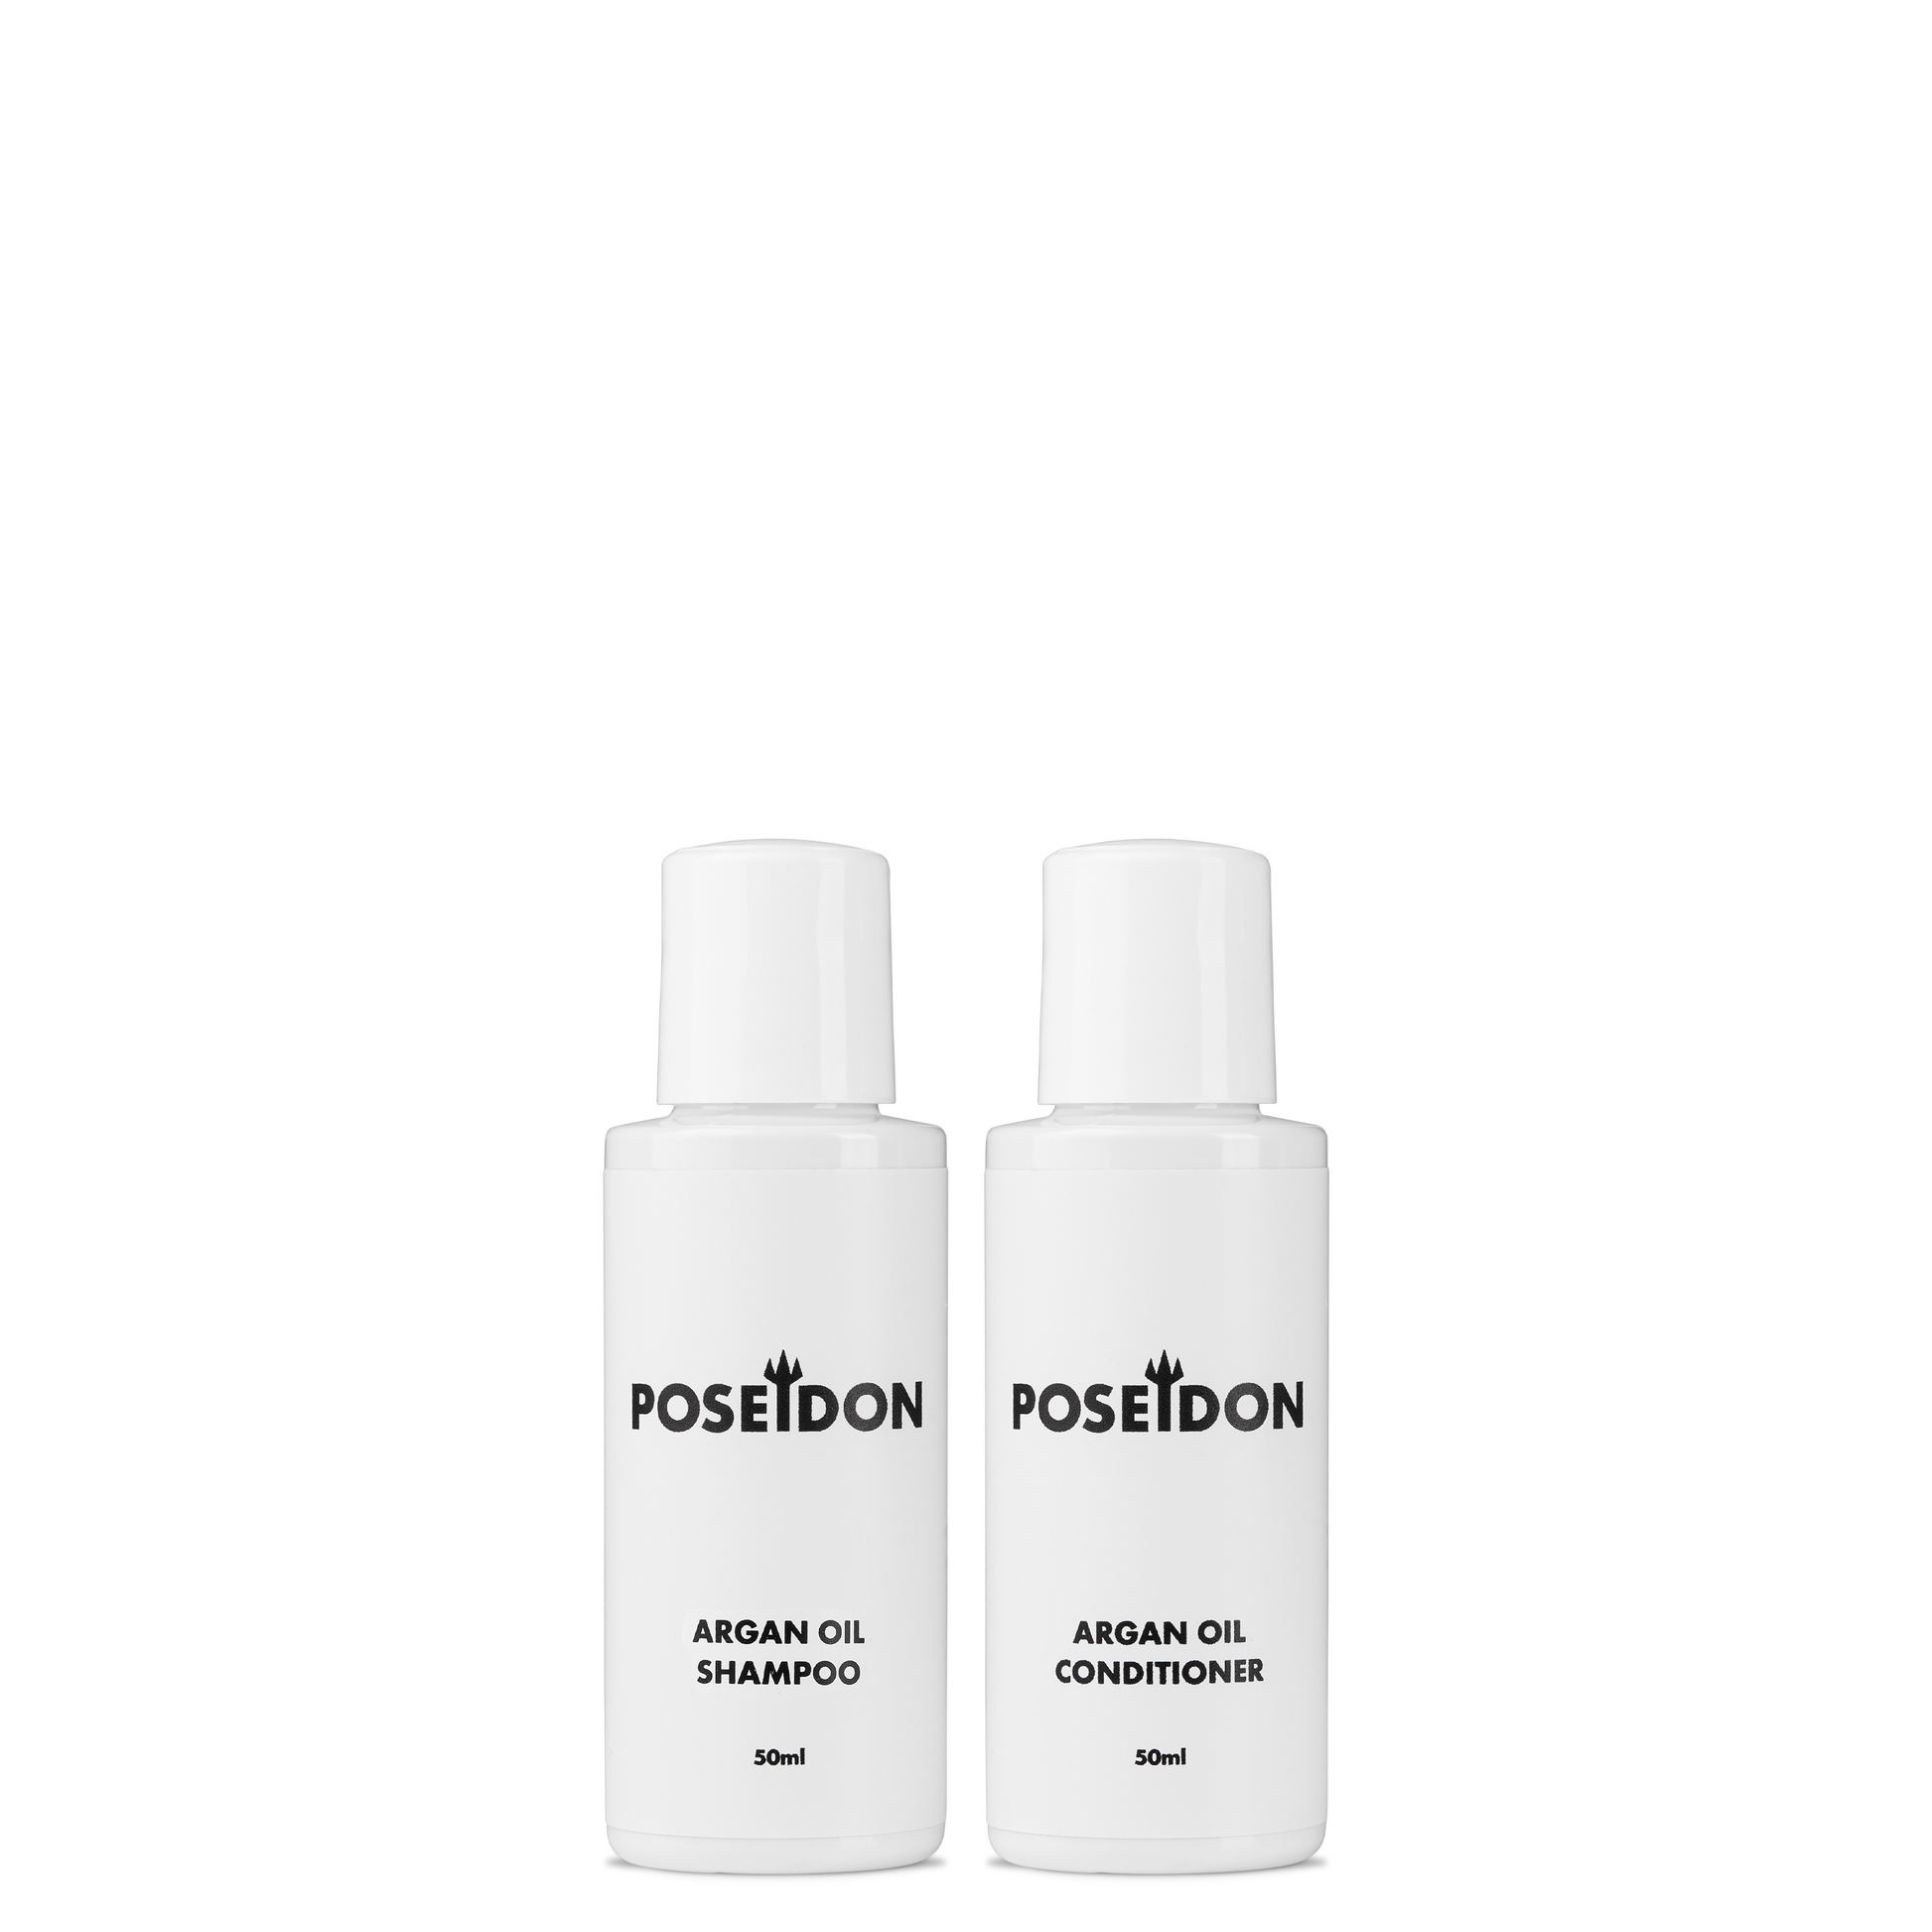 Poseidon Argan Oil Haircare Duo - Luxurious hydration with our nourishing Shampoo and Conditioner